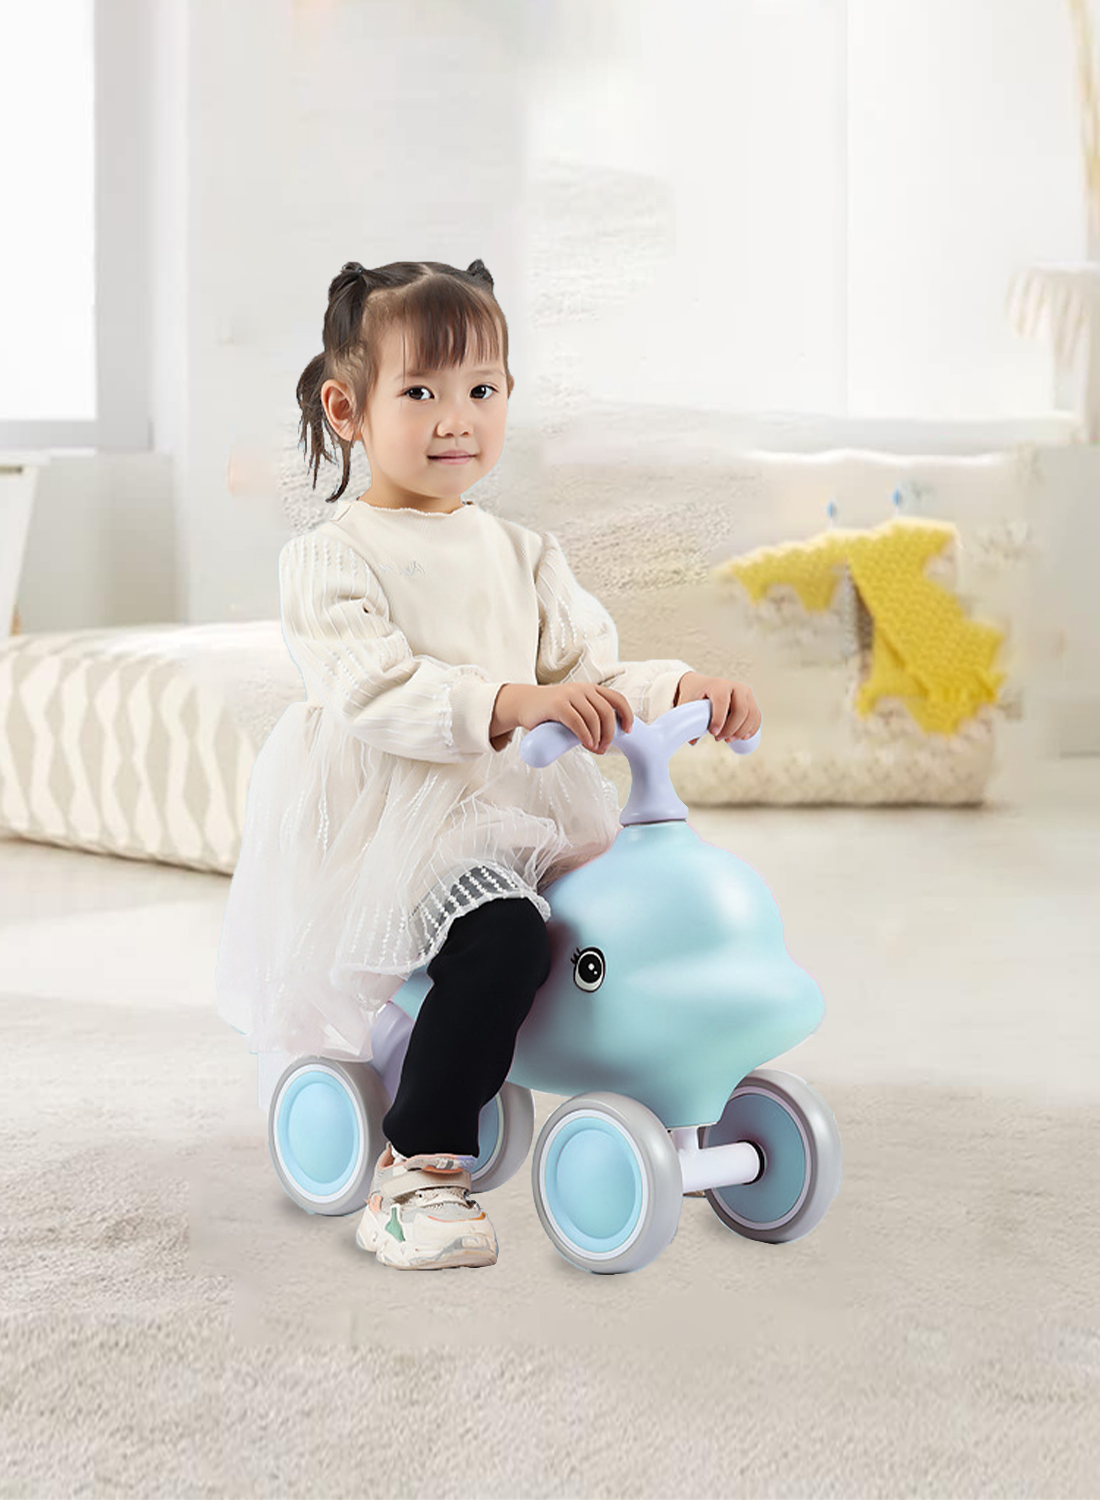 Kids Scooter with Anti-Tip Feature and 135° Steering, Enhances Balance and Coordination Skills for 1-3 Year Olds. Safe and Durable Four-Wheel Toy Vehicle with Soft Seat, Non-Slip Handles .